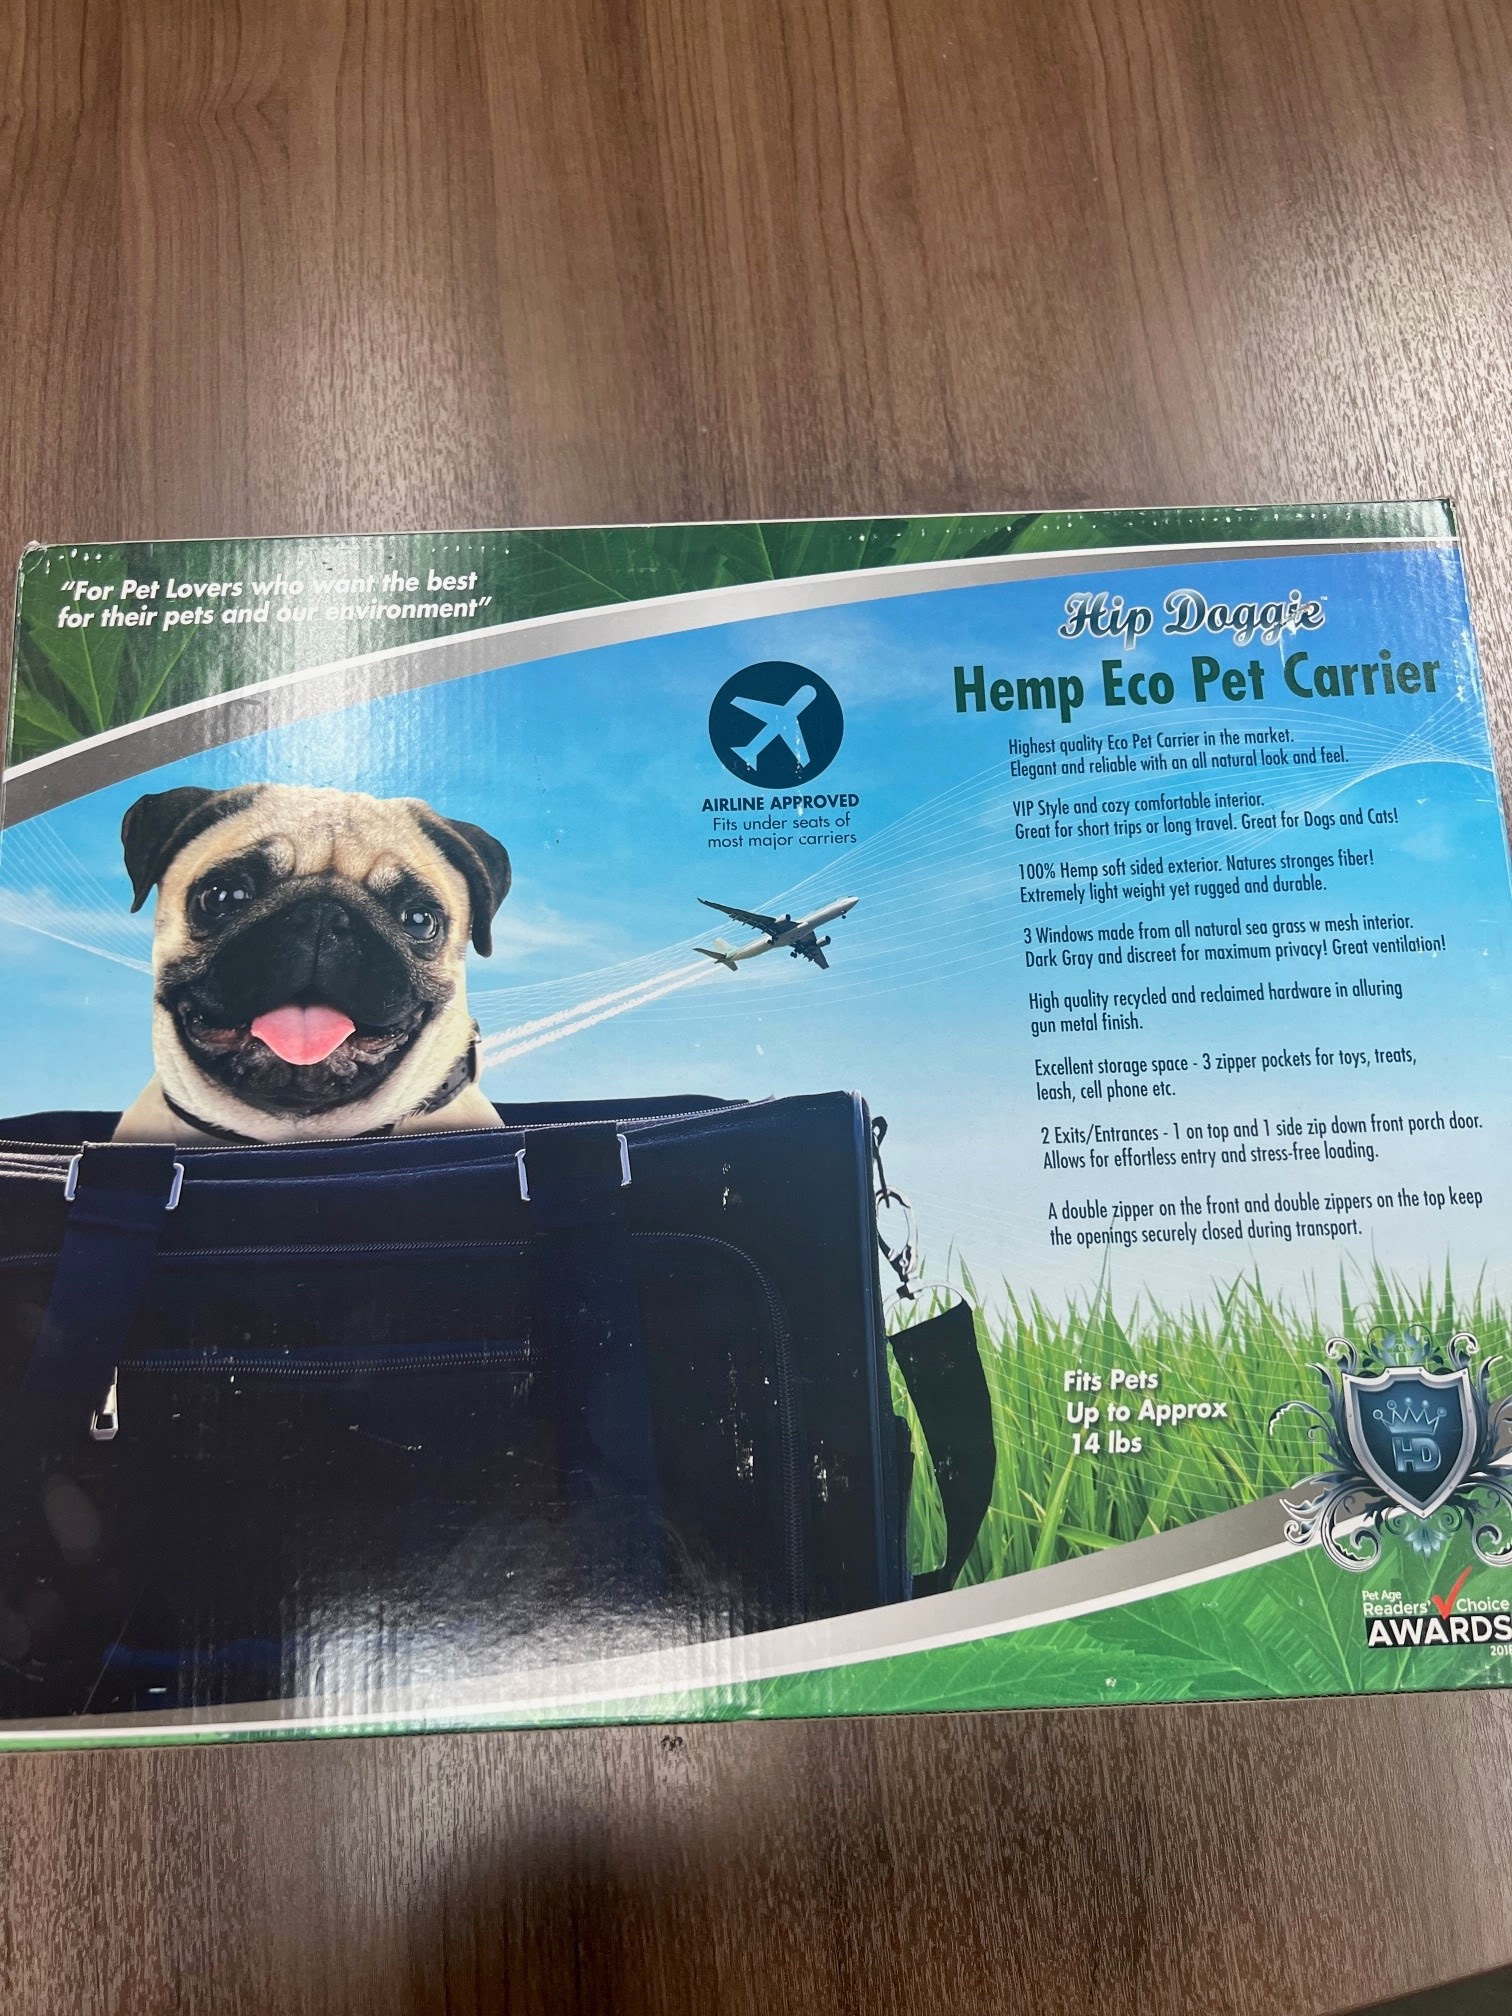 Hip Doggie Hemp Airline Approved Eco Pet Carrier. 900units. EXW Los Angeles $16.00unit.